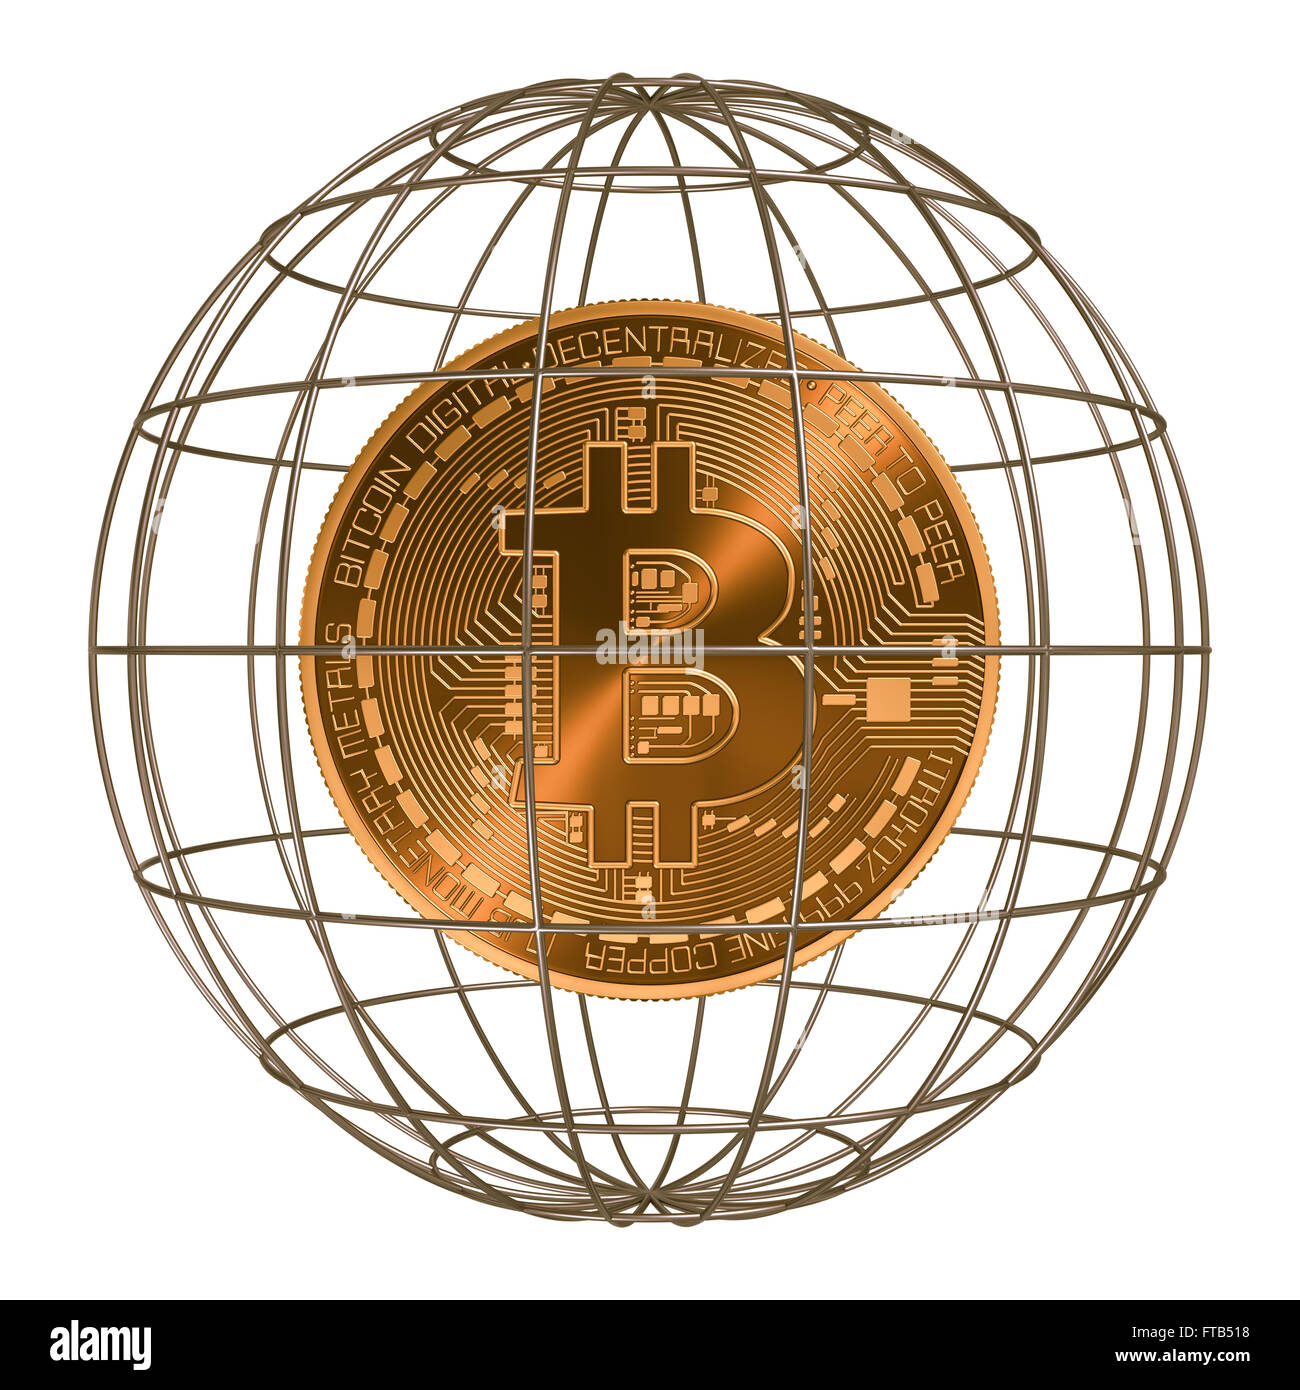 Bitcoin Inside The Cage. 3D Scene Over White Background. Stock Photo